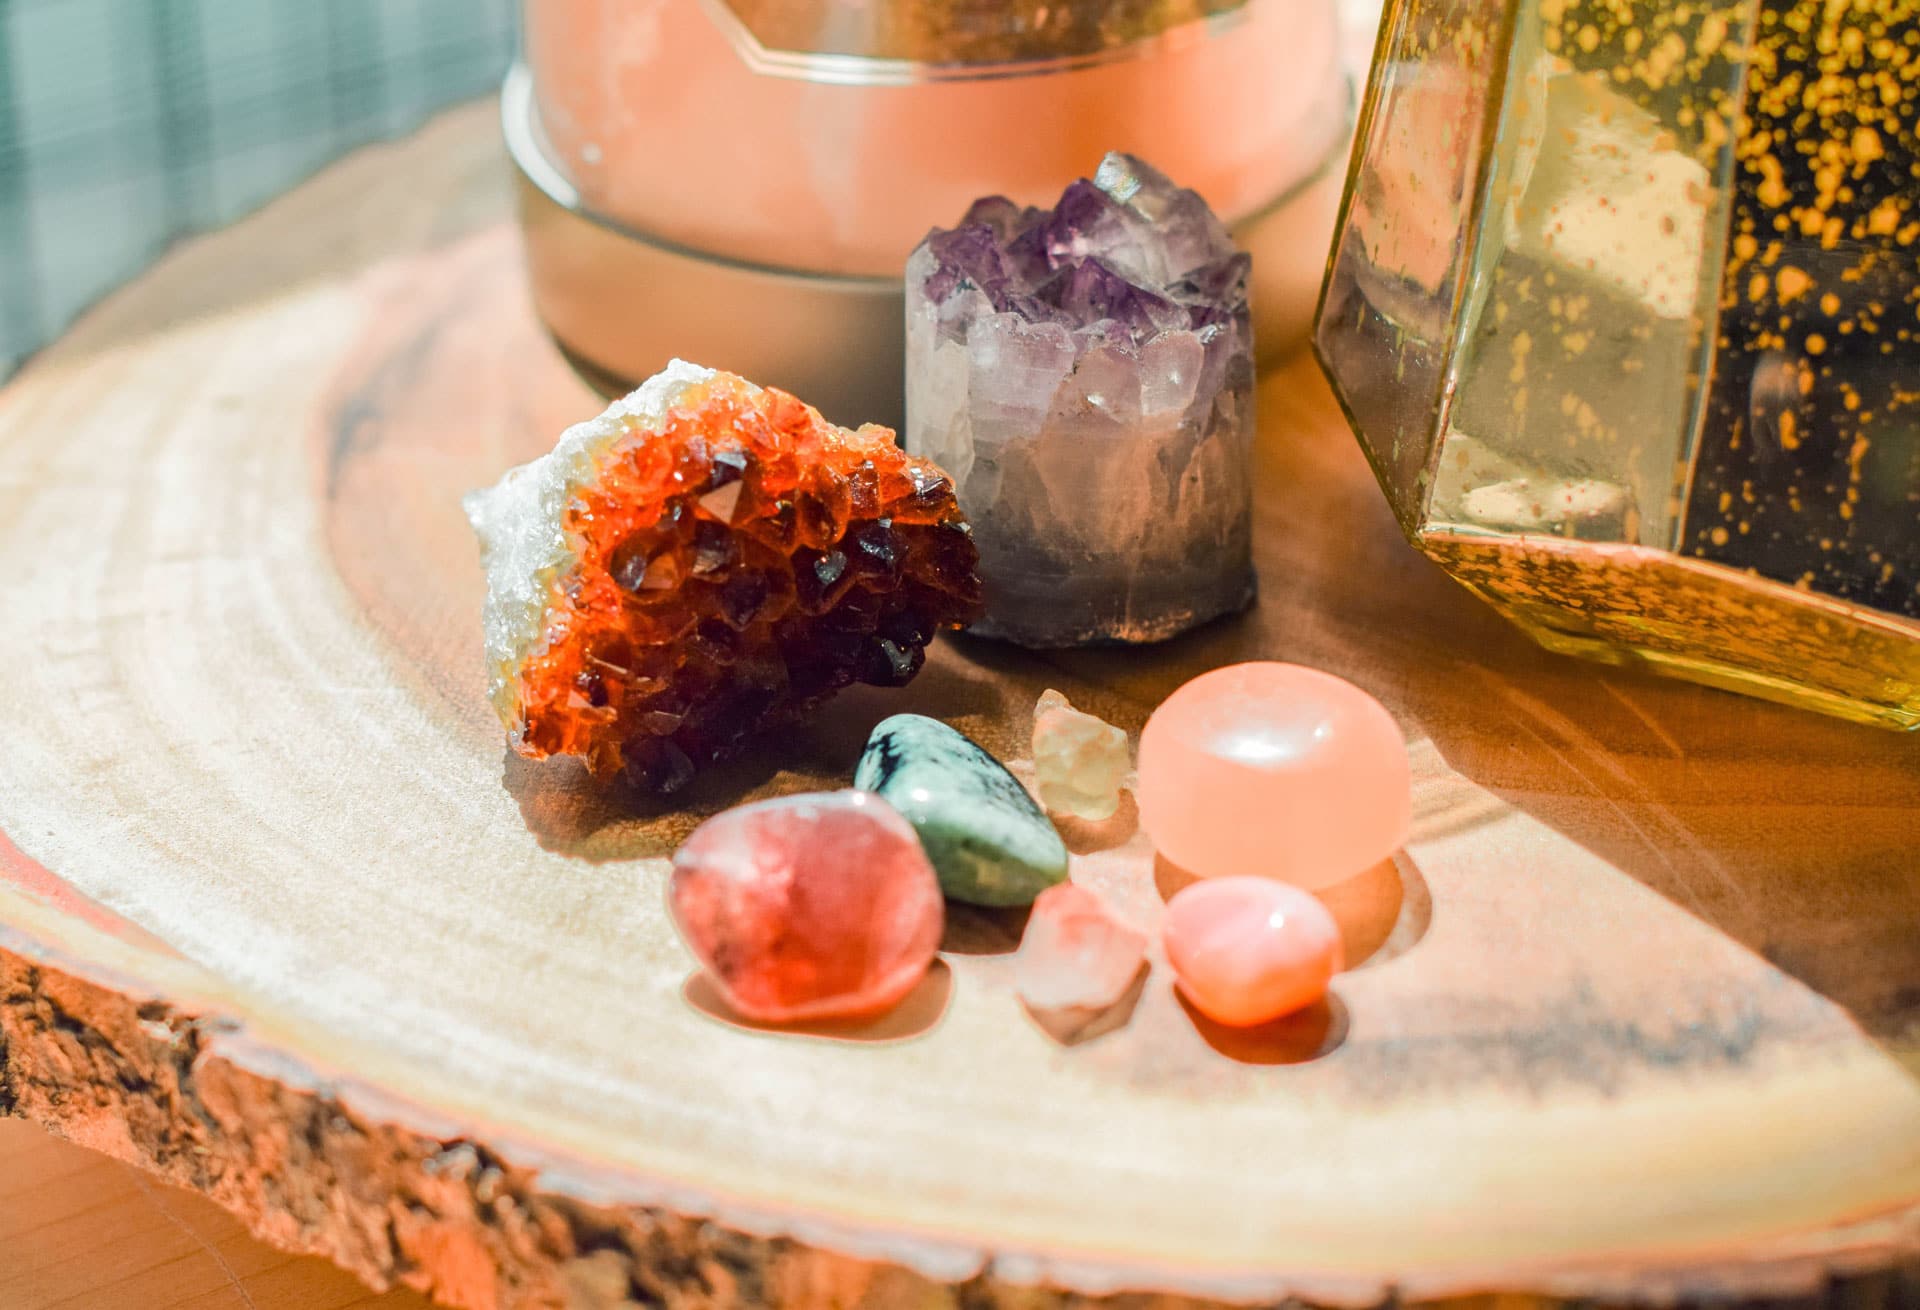 A warm-hued still life photo featuring a collection of vibrant crystals and gemstones artfully arranged on a wooden surface, embodying a witchy vibe with a softly blurred background suggesting a cozy interior setting